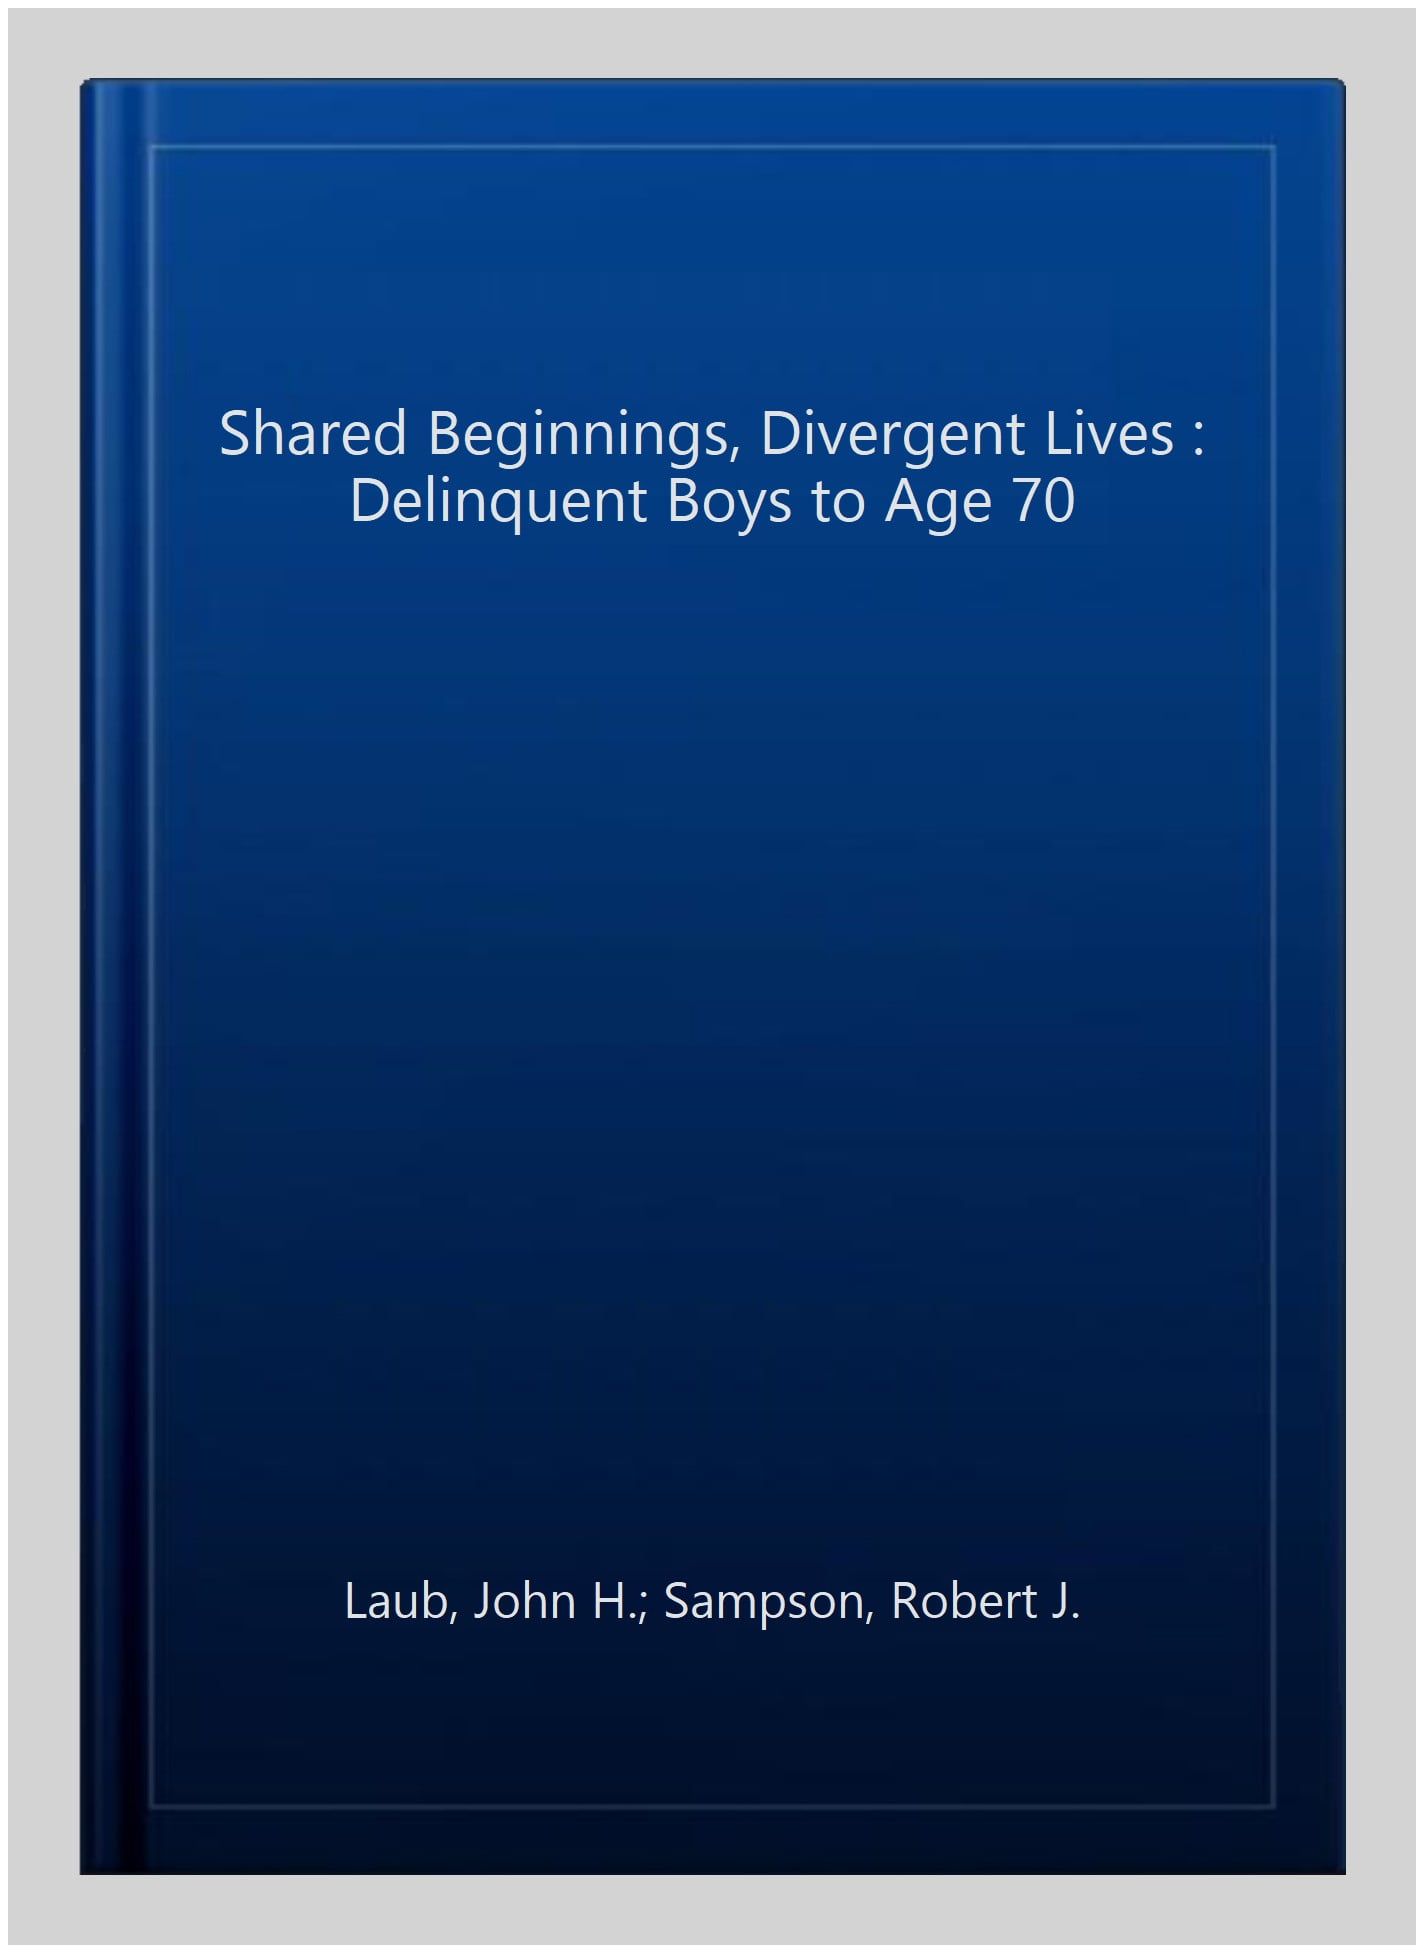 Shared Beginnings, Divergent Lives: Delinquent Boys to Age 70: Laub, John  H., Sampson, Robert J.: 9780674019935: : Books